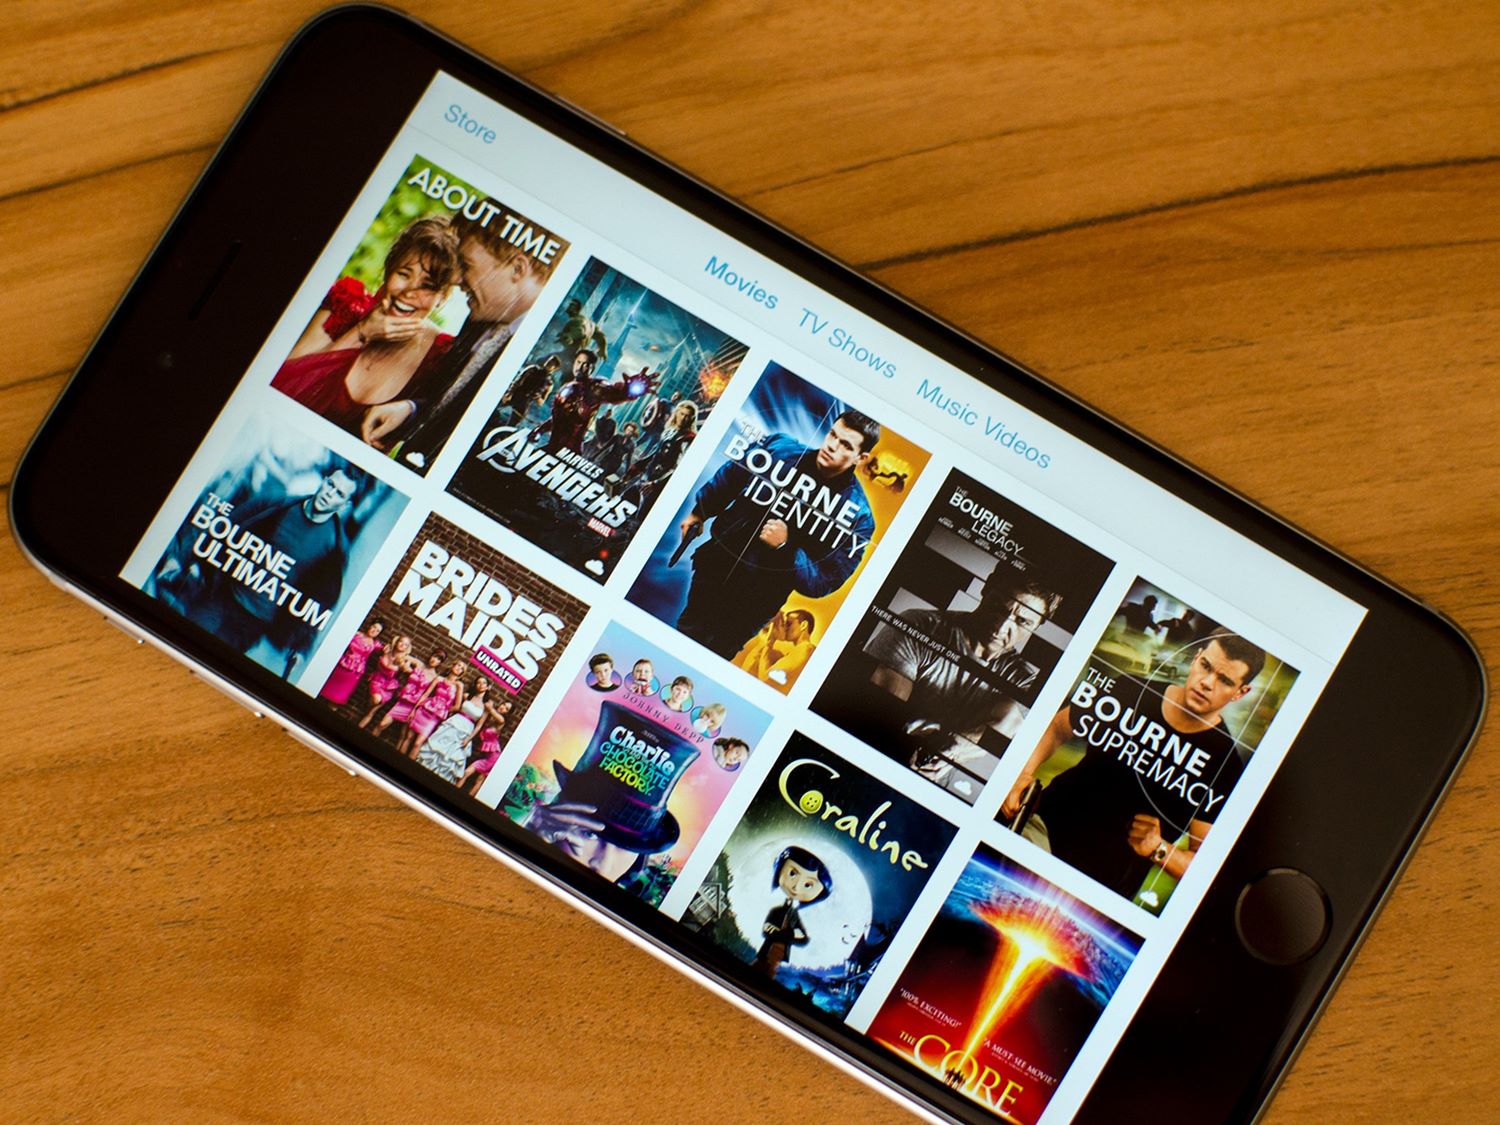 How To Watch Movies On IPhone